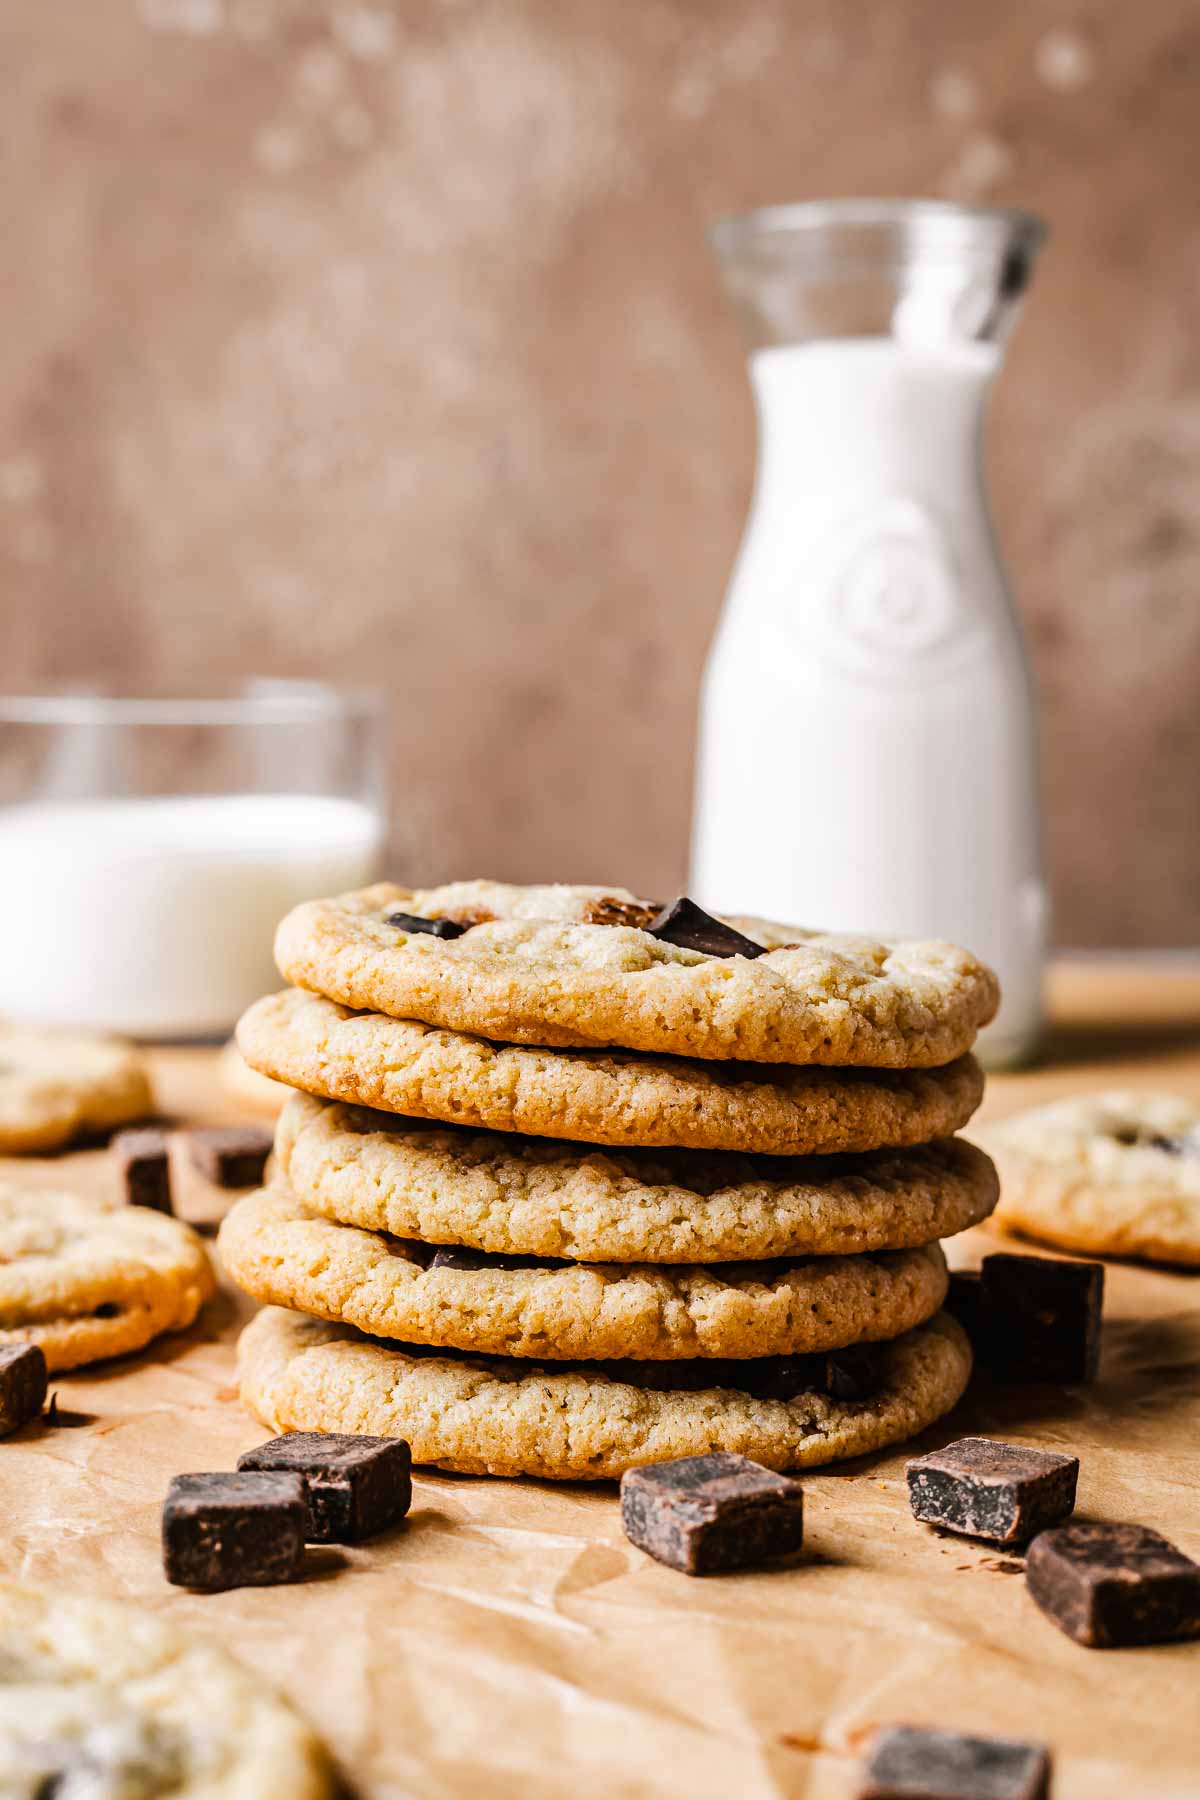 A stack of five chocolate chip cookies with a pitcher and glass of milk in the background.